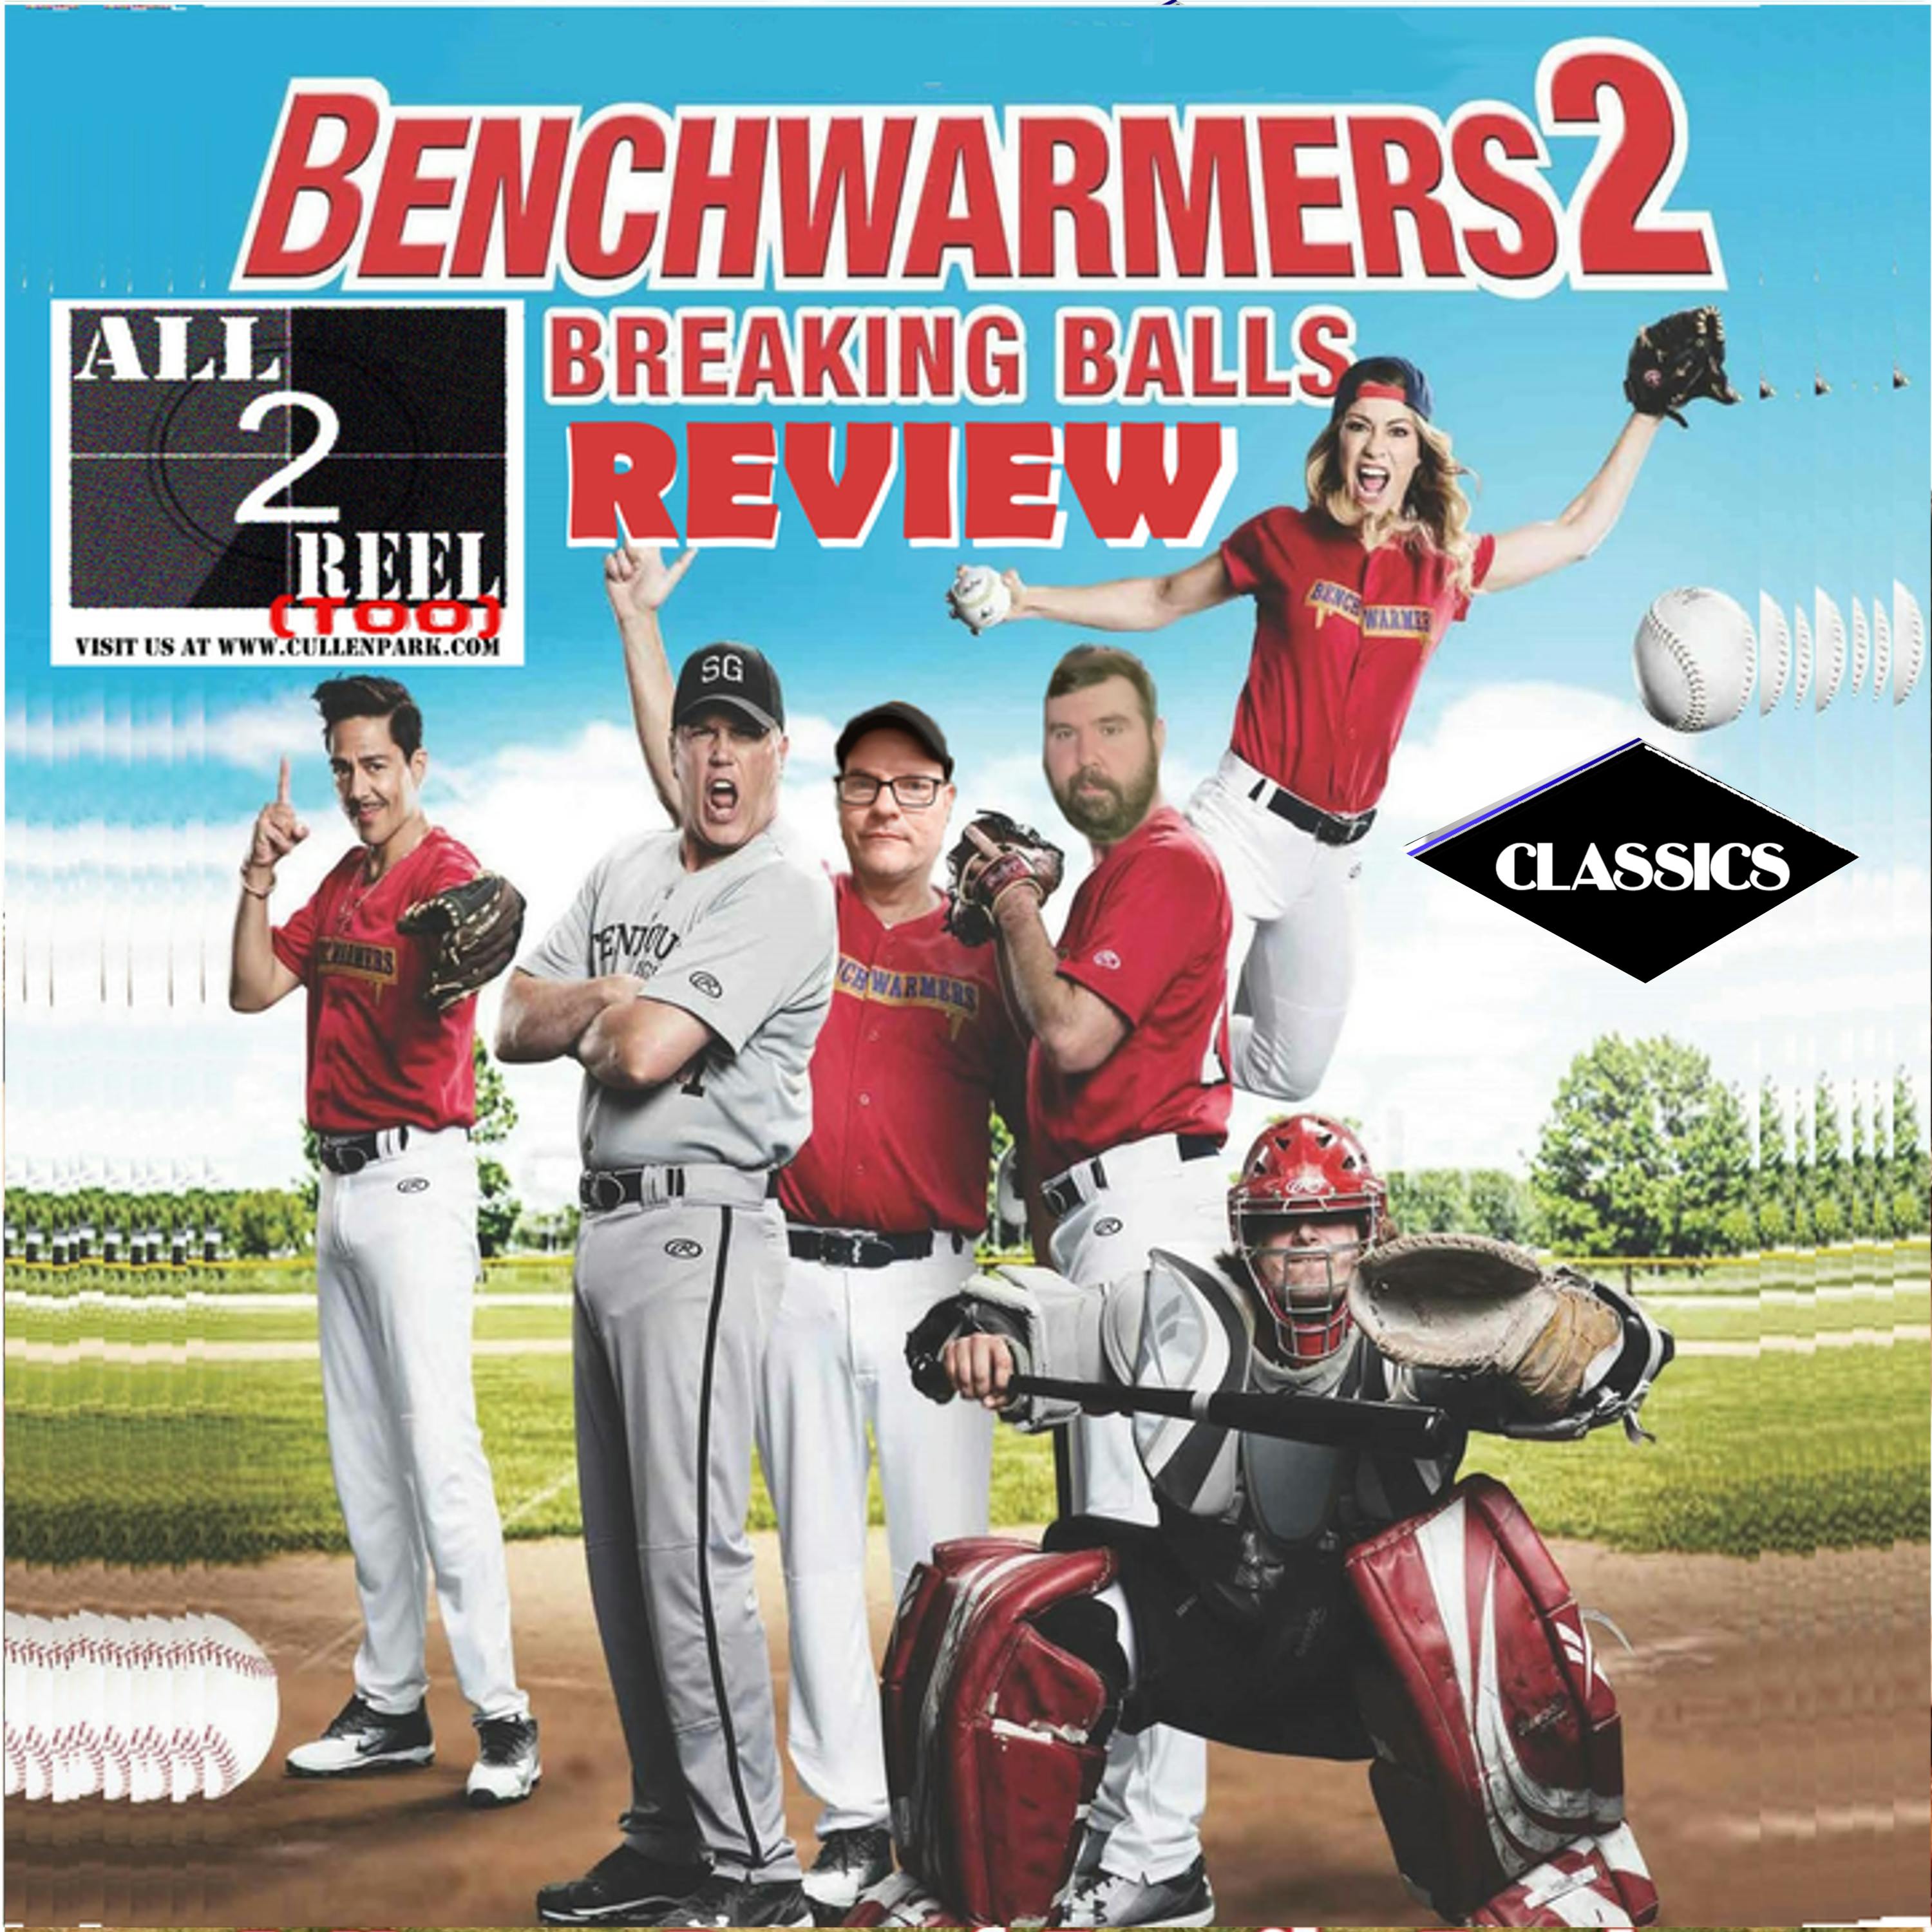 ALL2REELTOO CLASSICS -Benchwarmers 2: Breaking Balls (2019)  - Direct from Hell